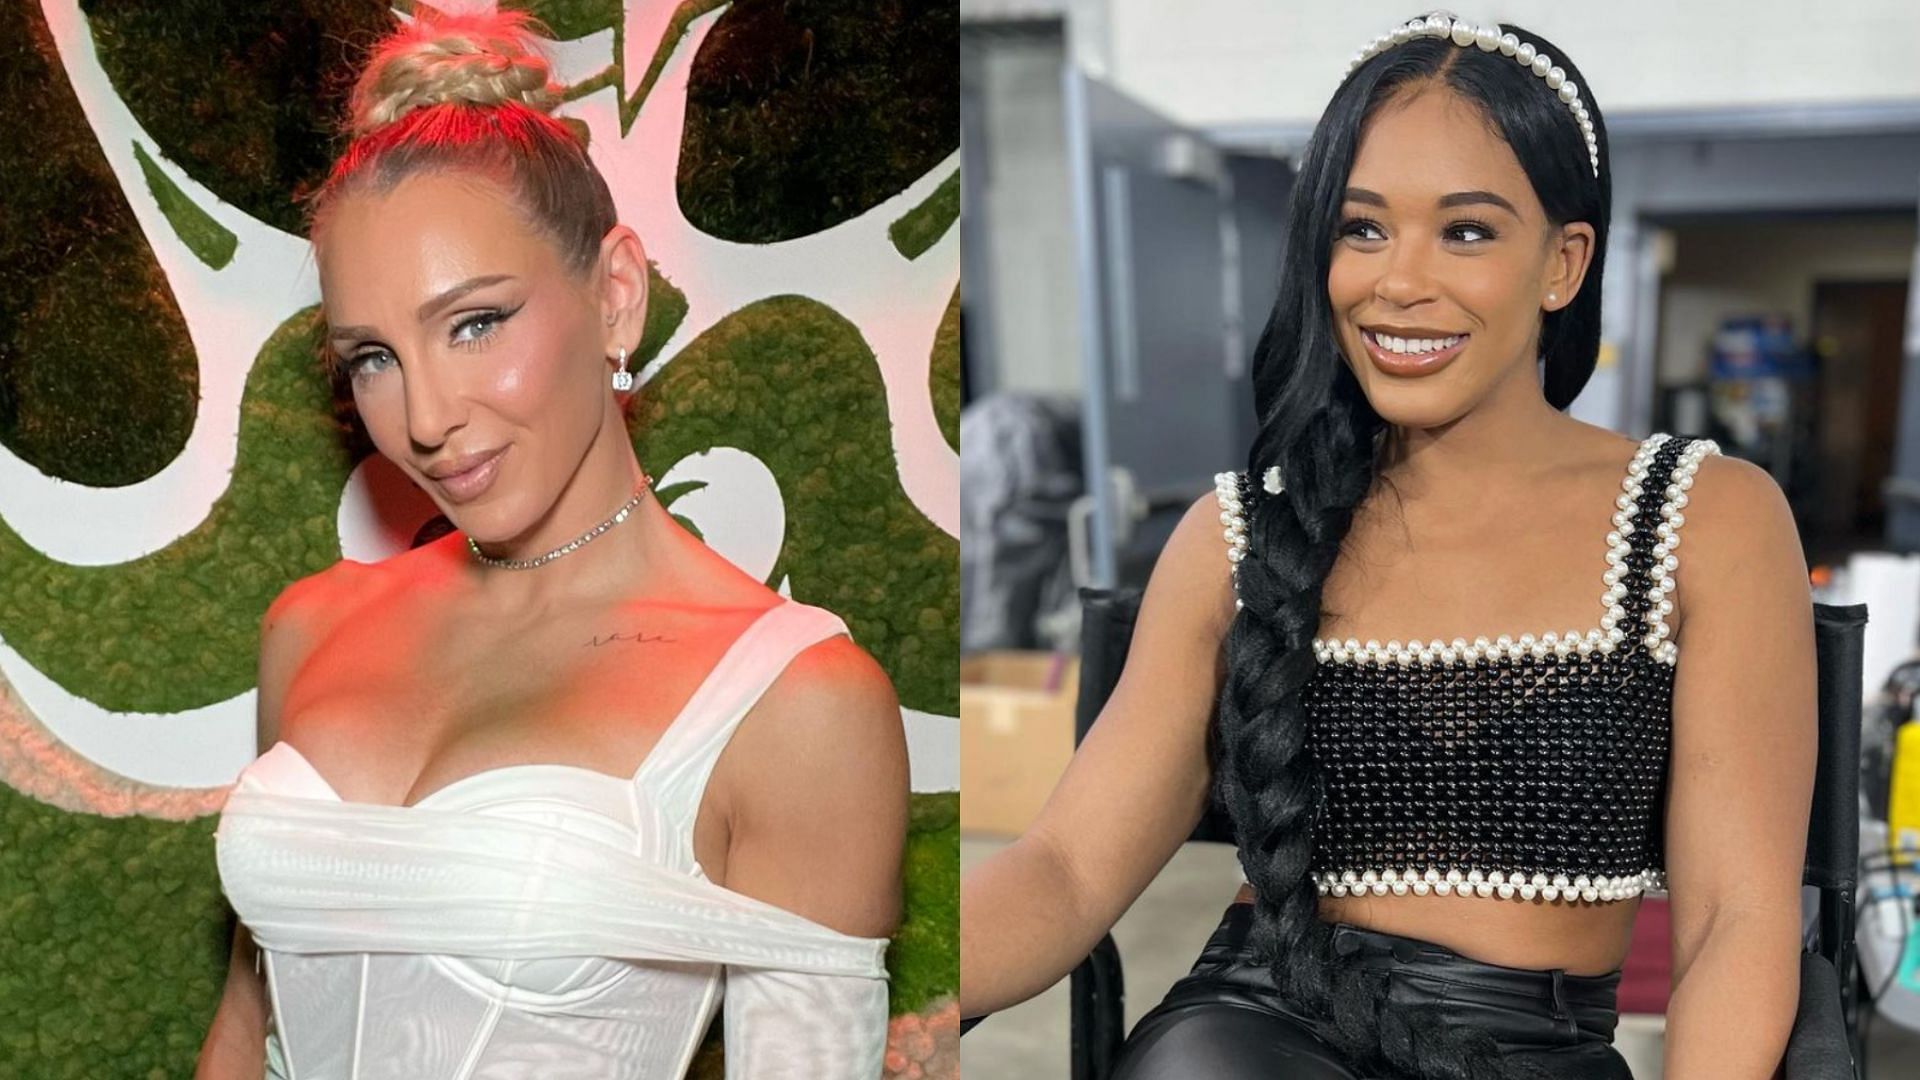 Charlotte Flair (left), and Bianca Belair (right). Images via Instagram.